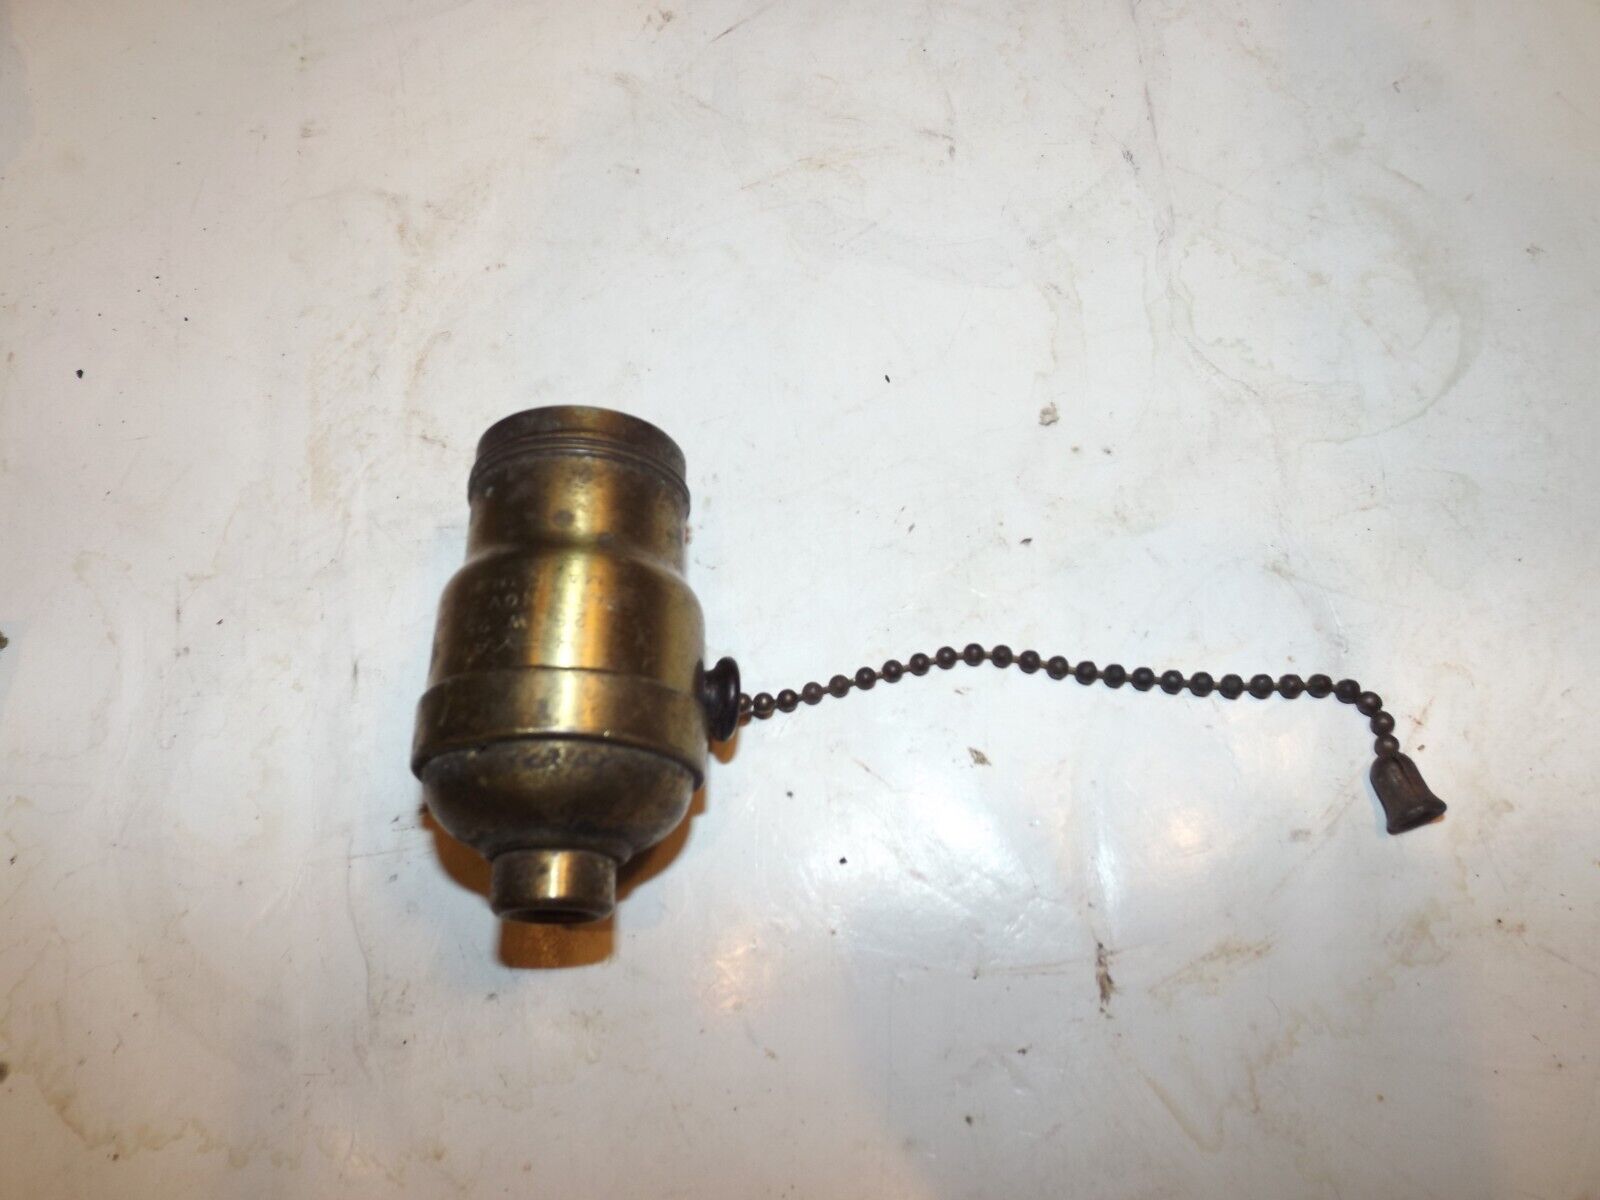 Antique Bryant Brass Fatboy Pullchain Light Fixture Lamp Socket Tested EXC Cond